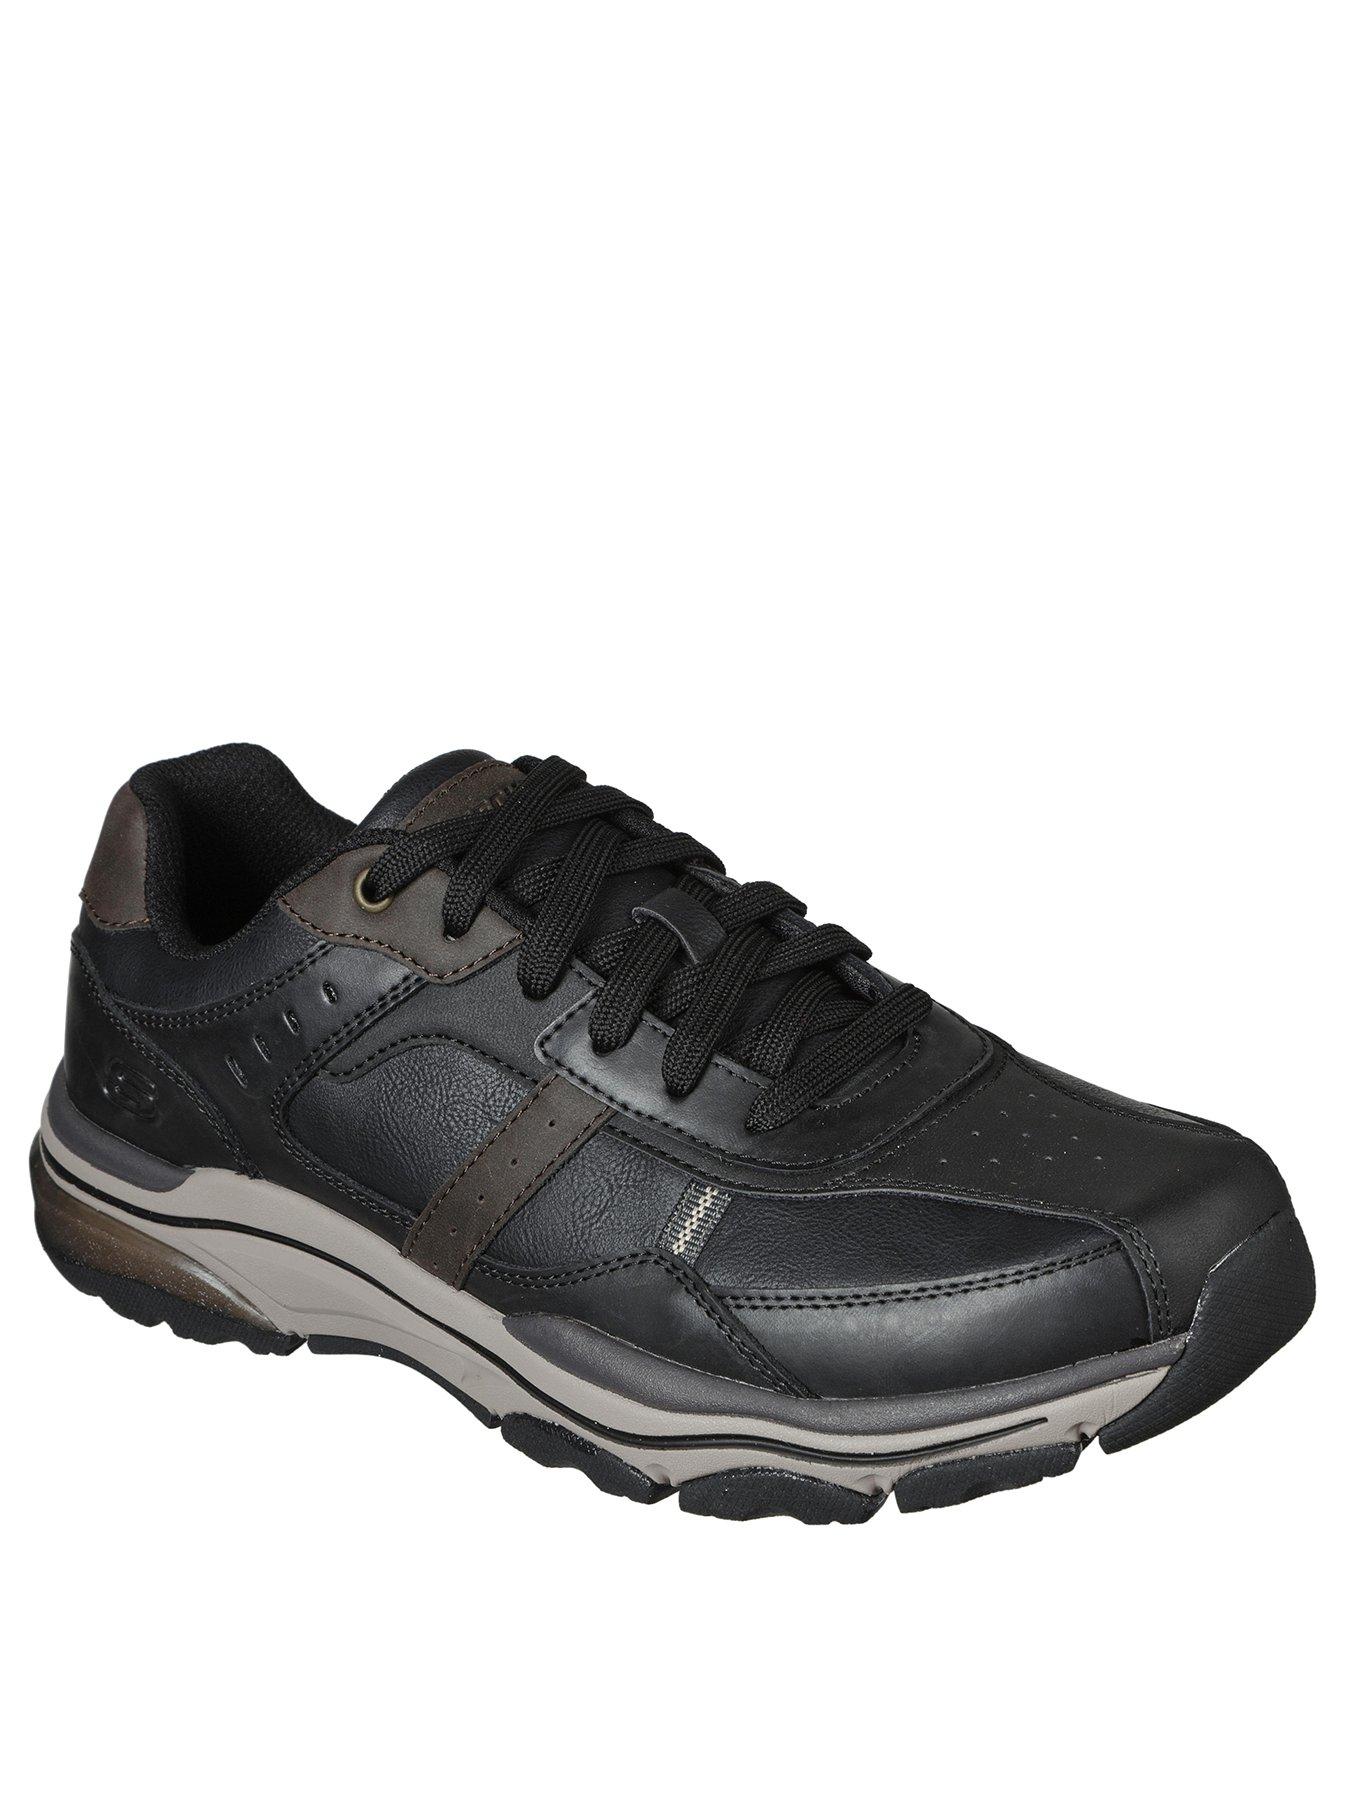 skechers all leather shoes